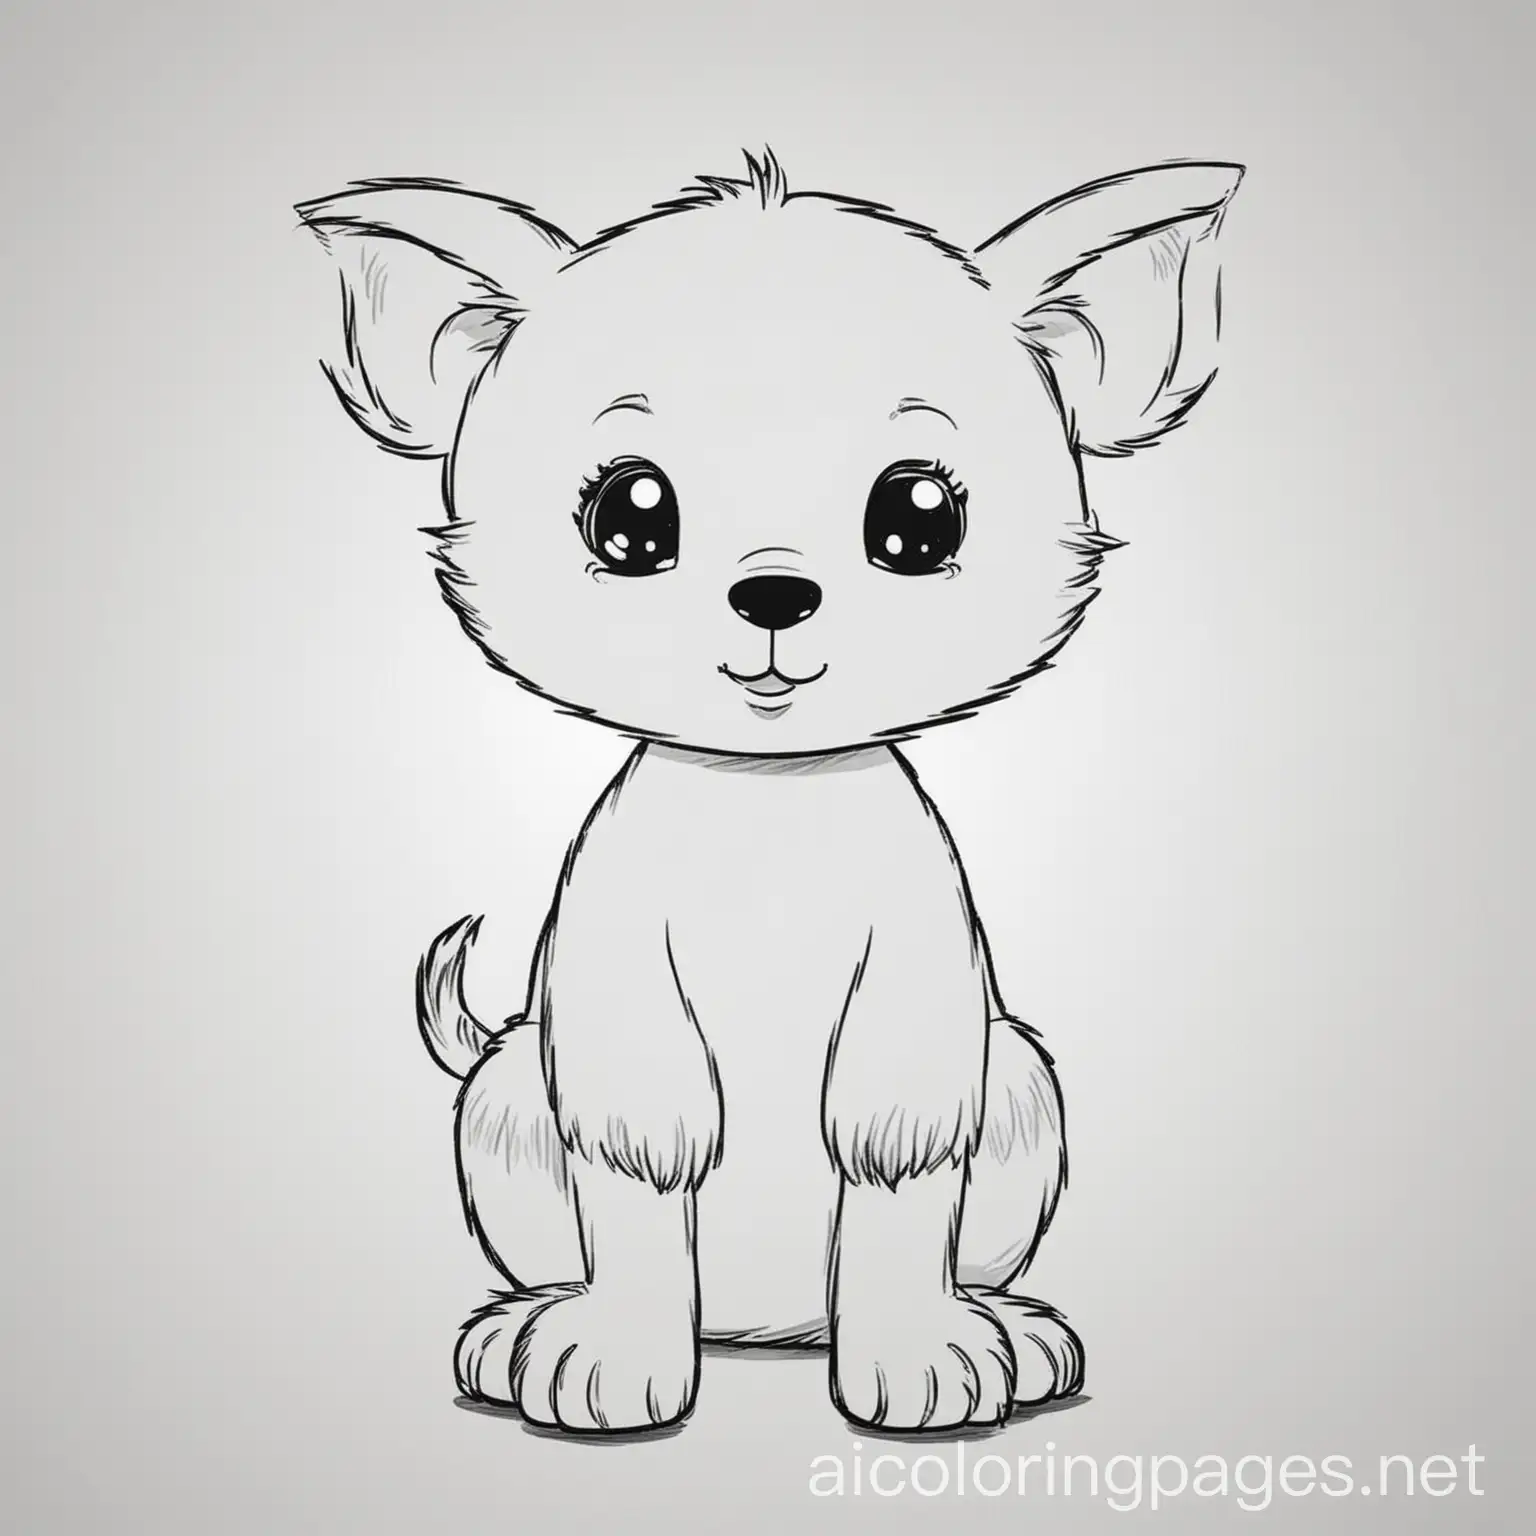 Kid animal, Coloring Page, black and white, line art, white background, Simplicity, Ample White Space. The background of the coloring page is plain white to make it easy for young children to color within the lines. The outlines of all the subjects are easy to distinguish, making it simple for kids to color without too much difficulty